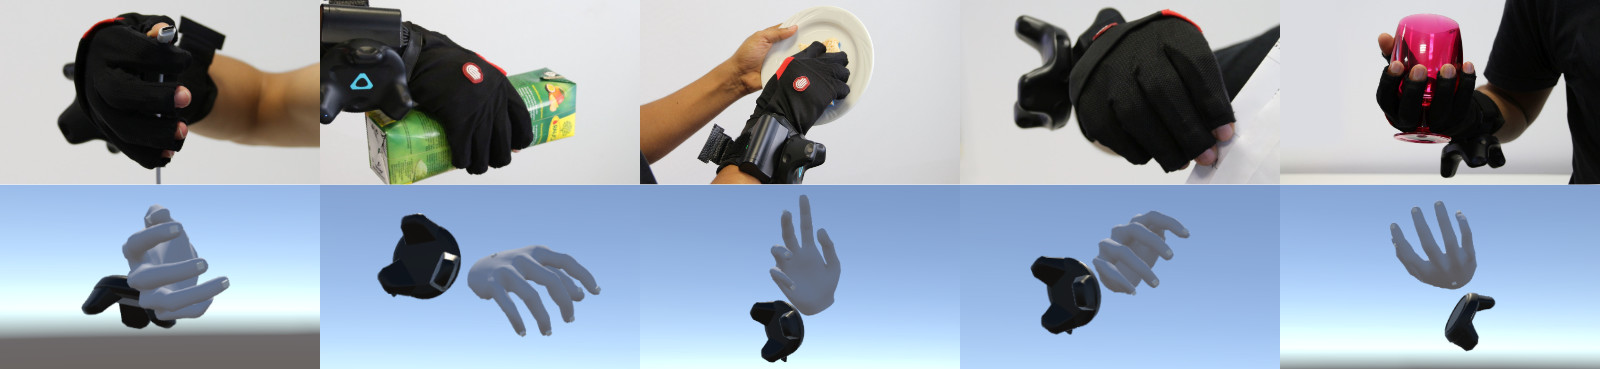 /images/projects/solofinger/vr_glove.jpg